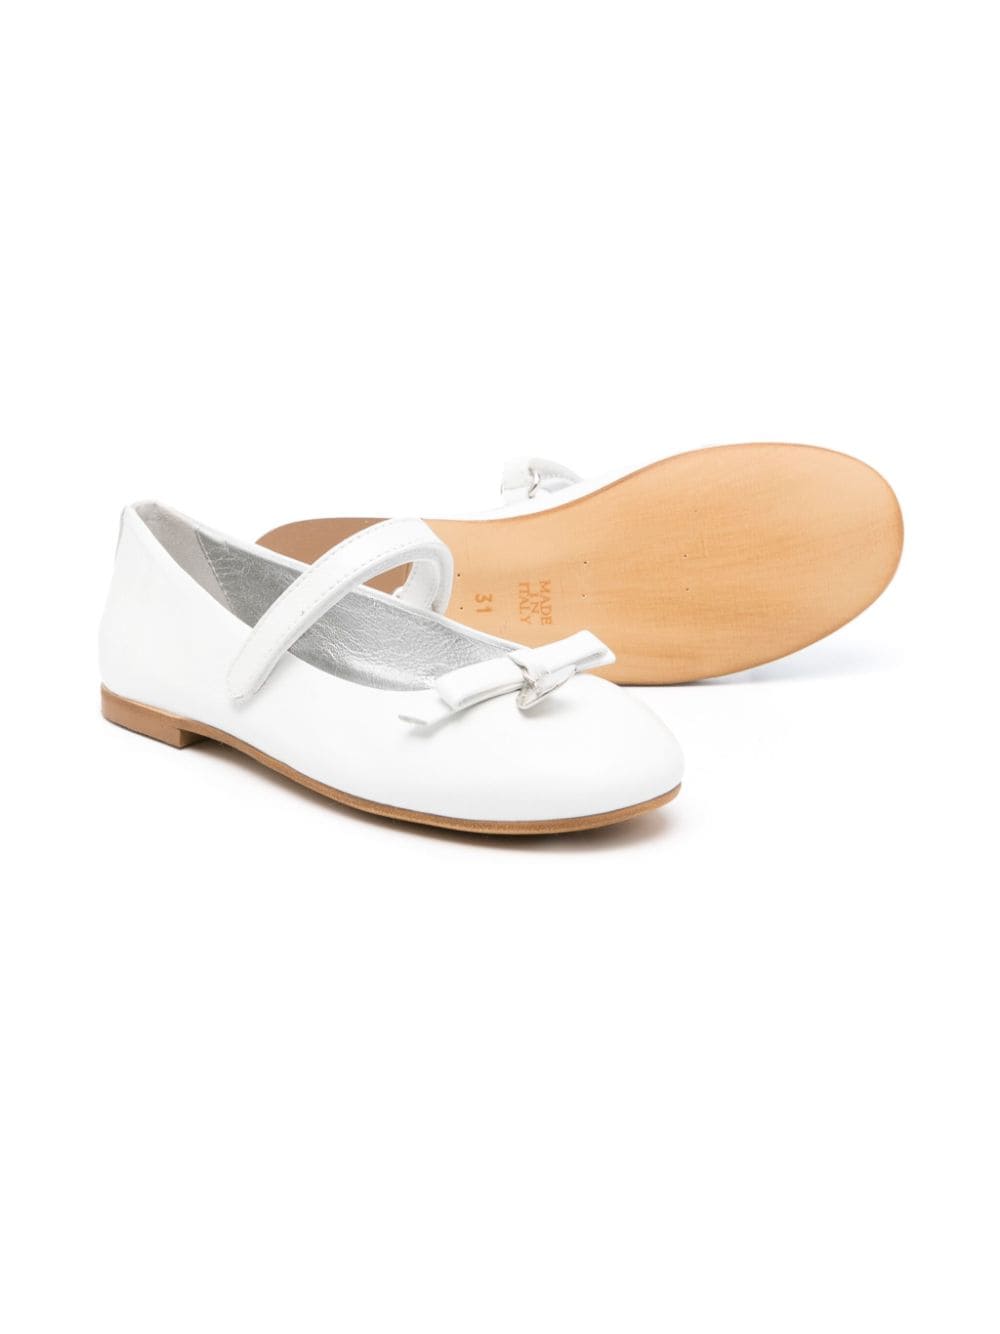 Ballerines fille blanches